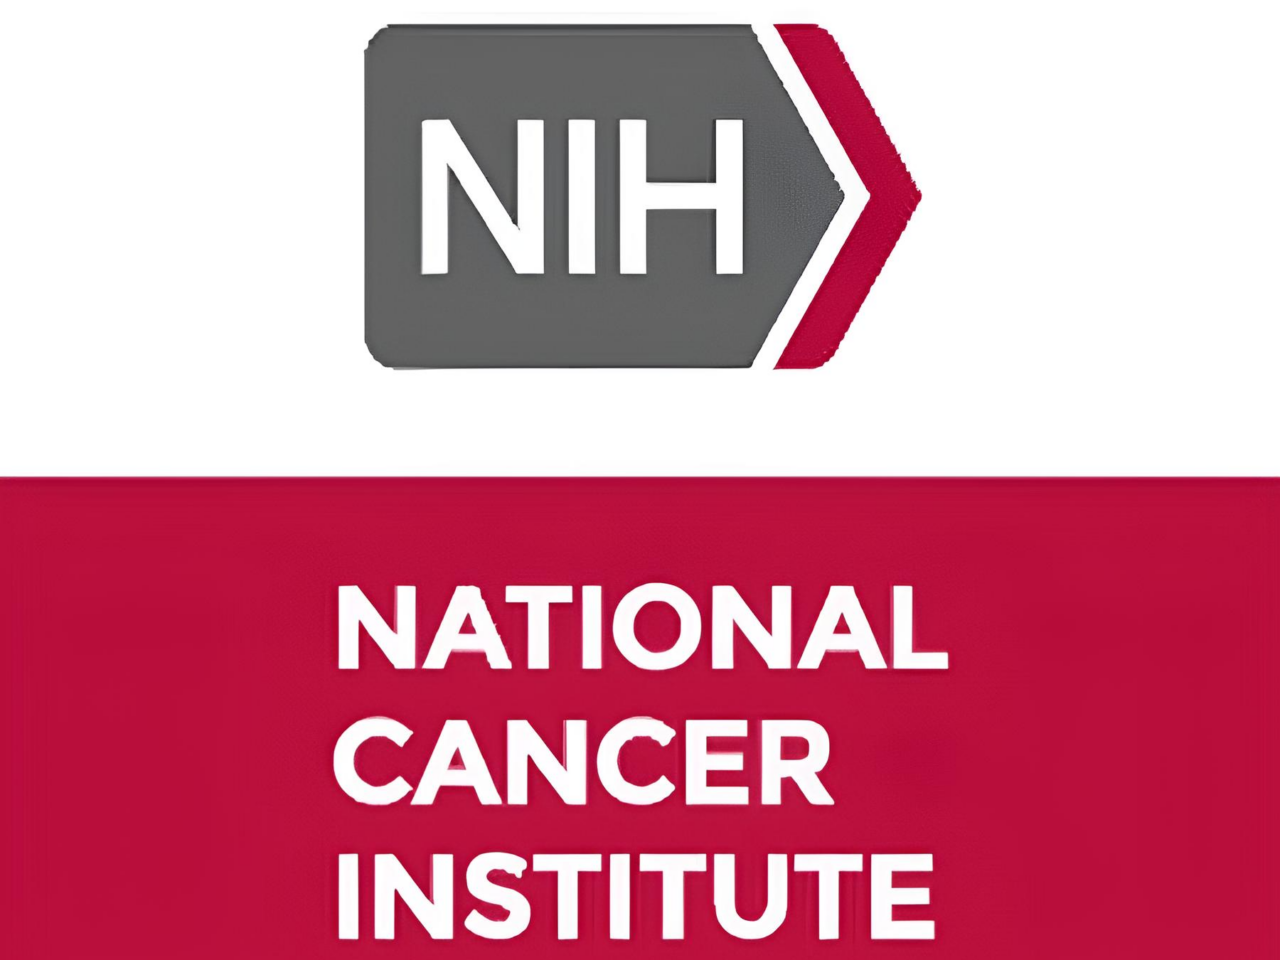 National Cancer Institute – 9 additional harmonized data sets representing all clinical data sets in the CCDI Data Ecosystem